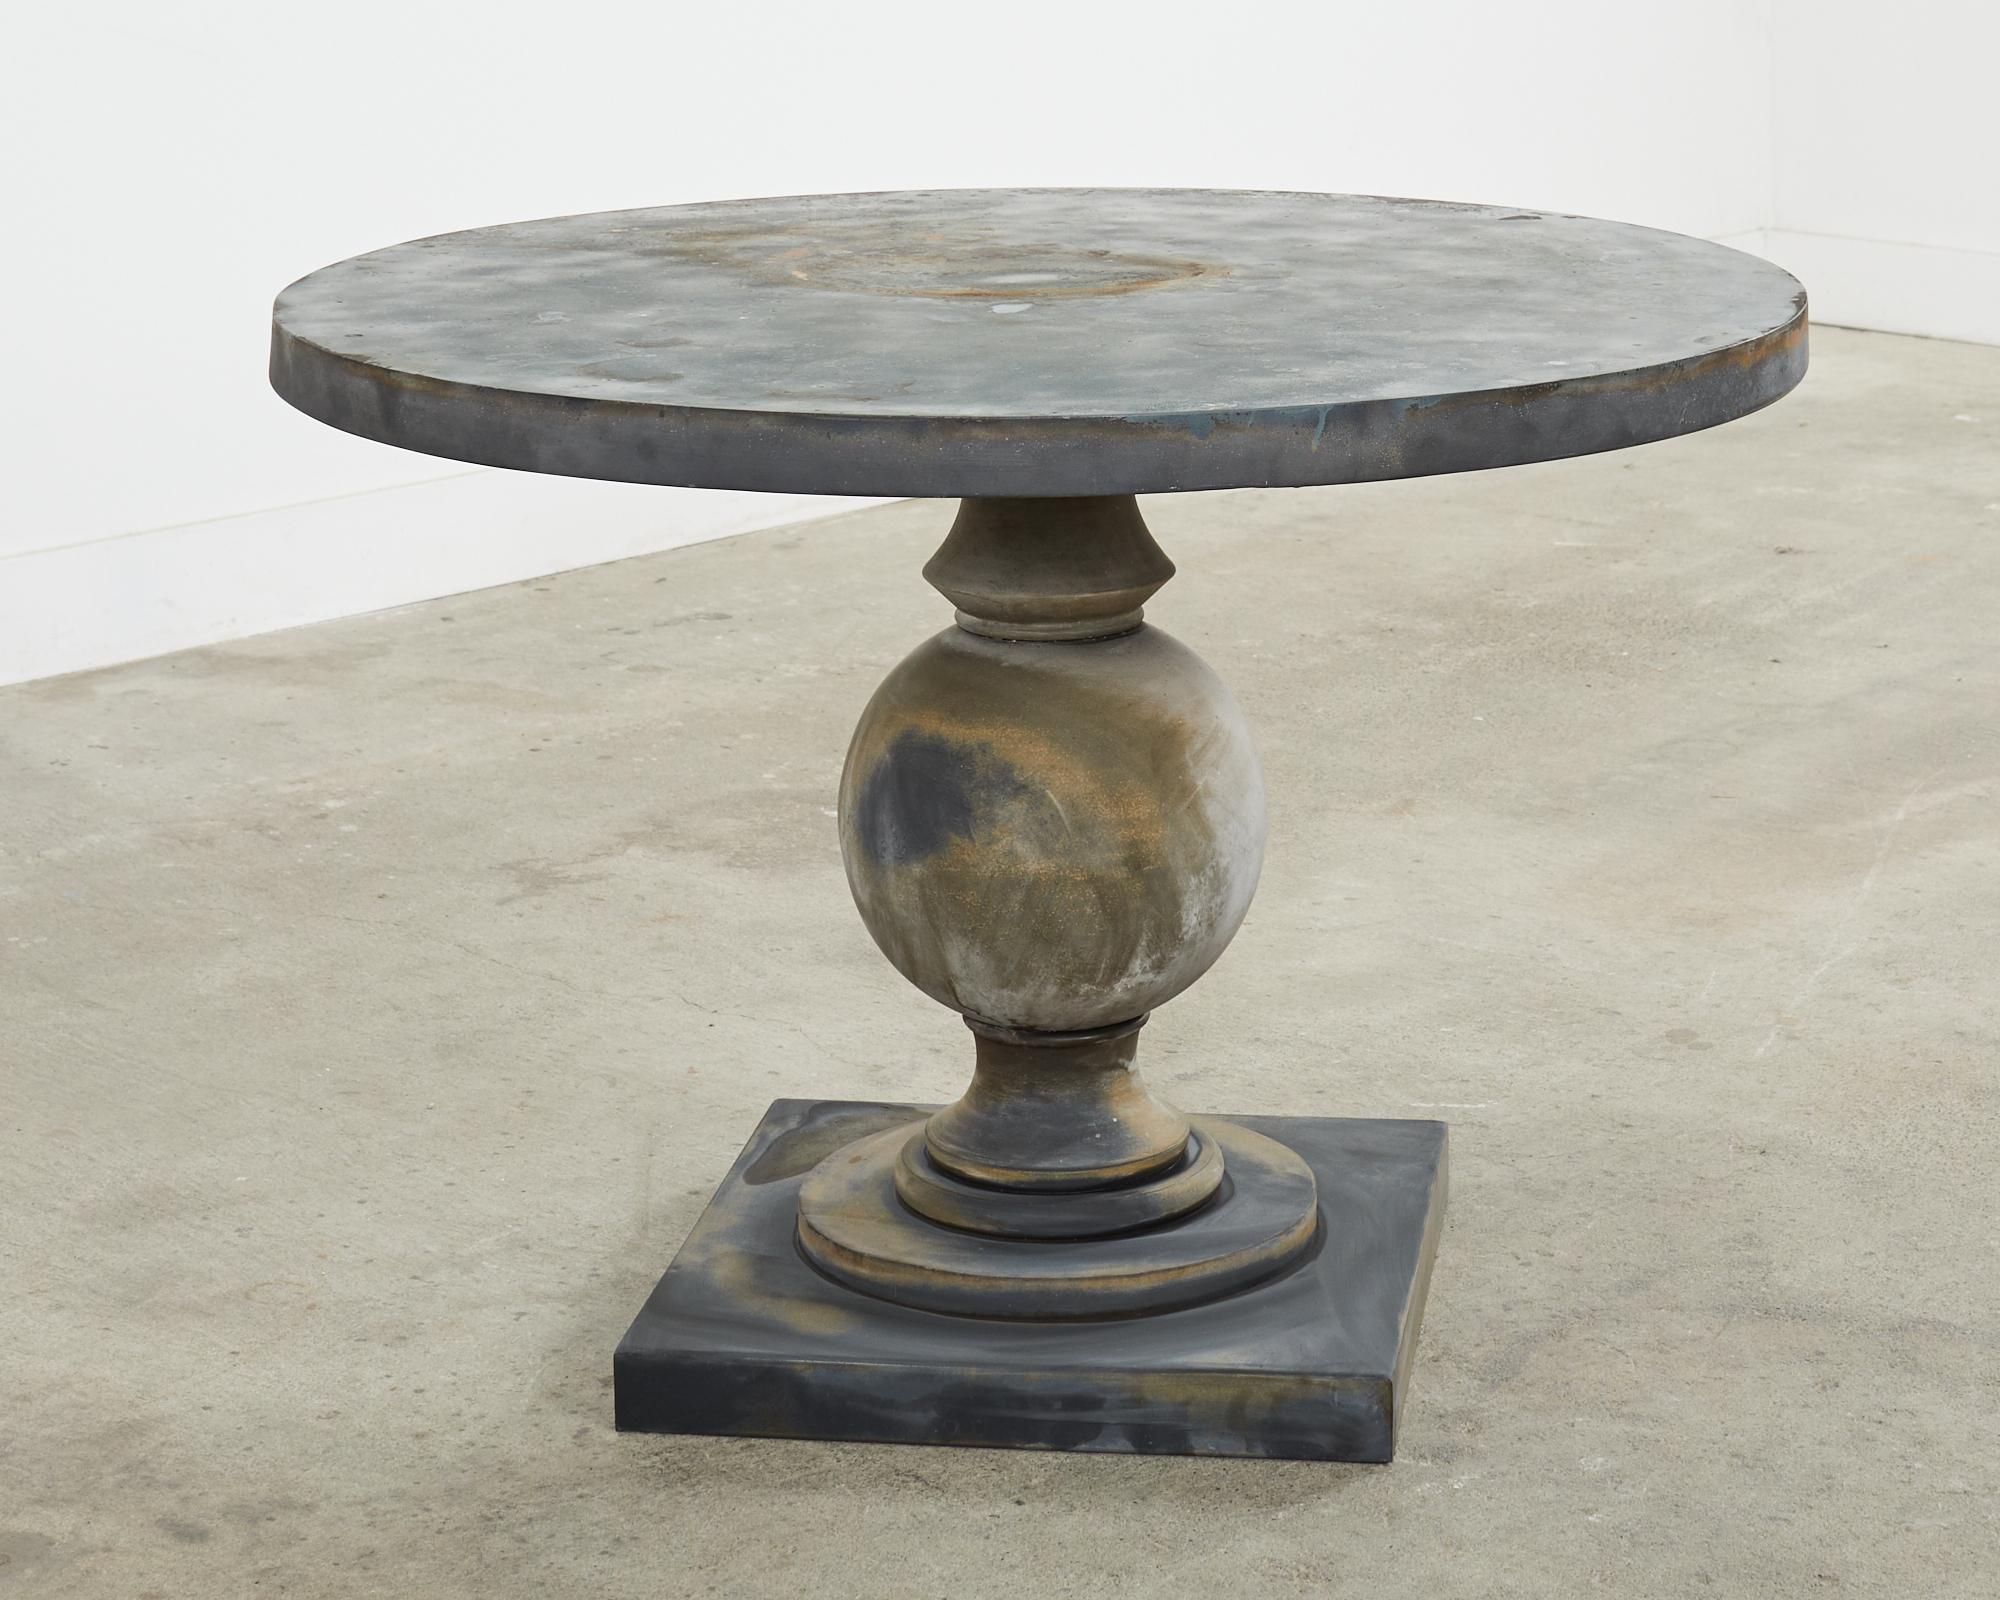 Iron Neoclassical Style Patinated Zinc Garden Dining Center Table